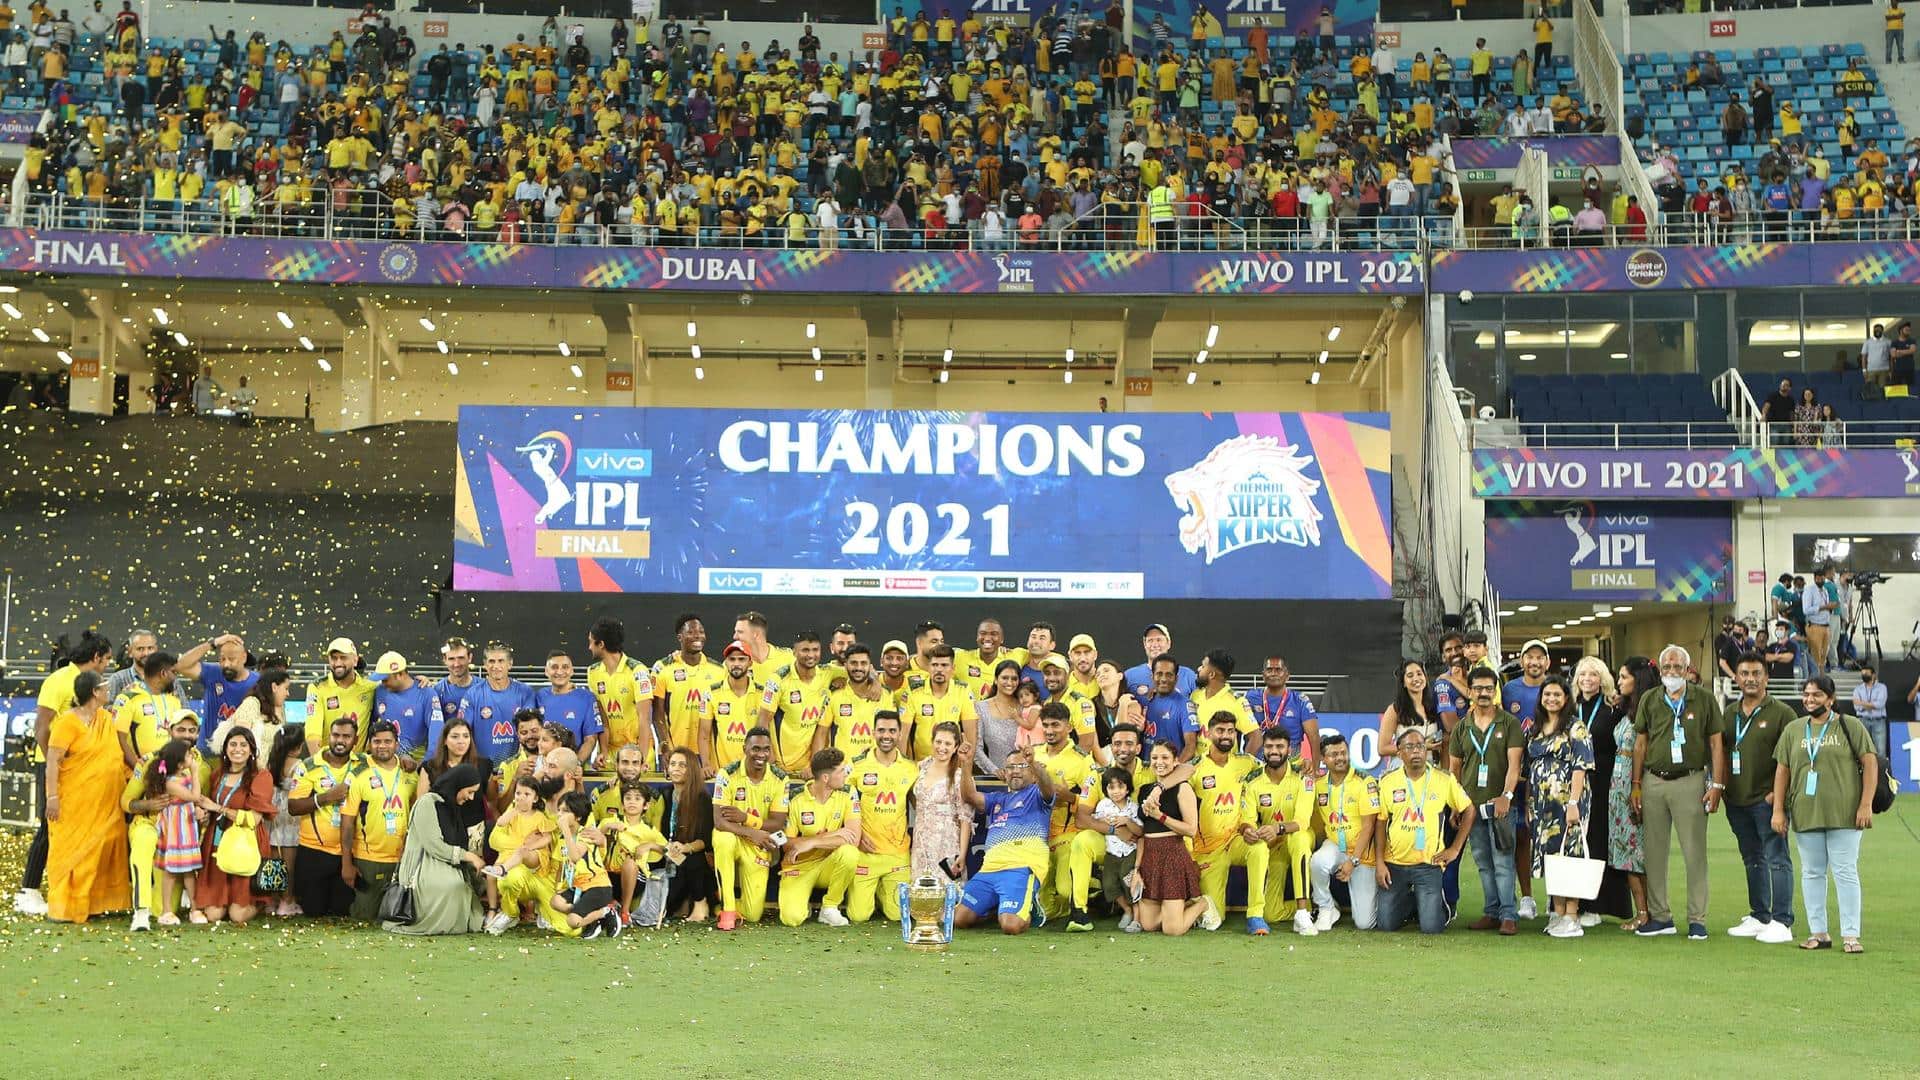 Breaking down CSK's performance in IPL finals: Key stats